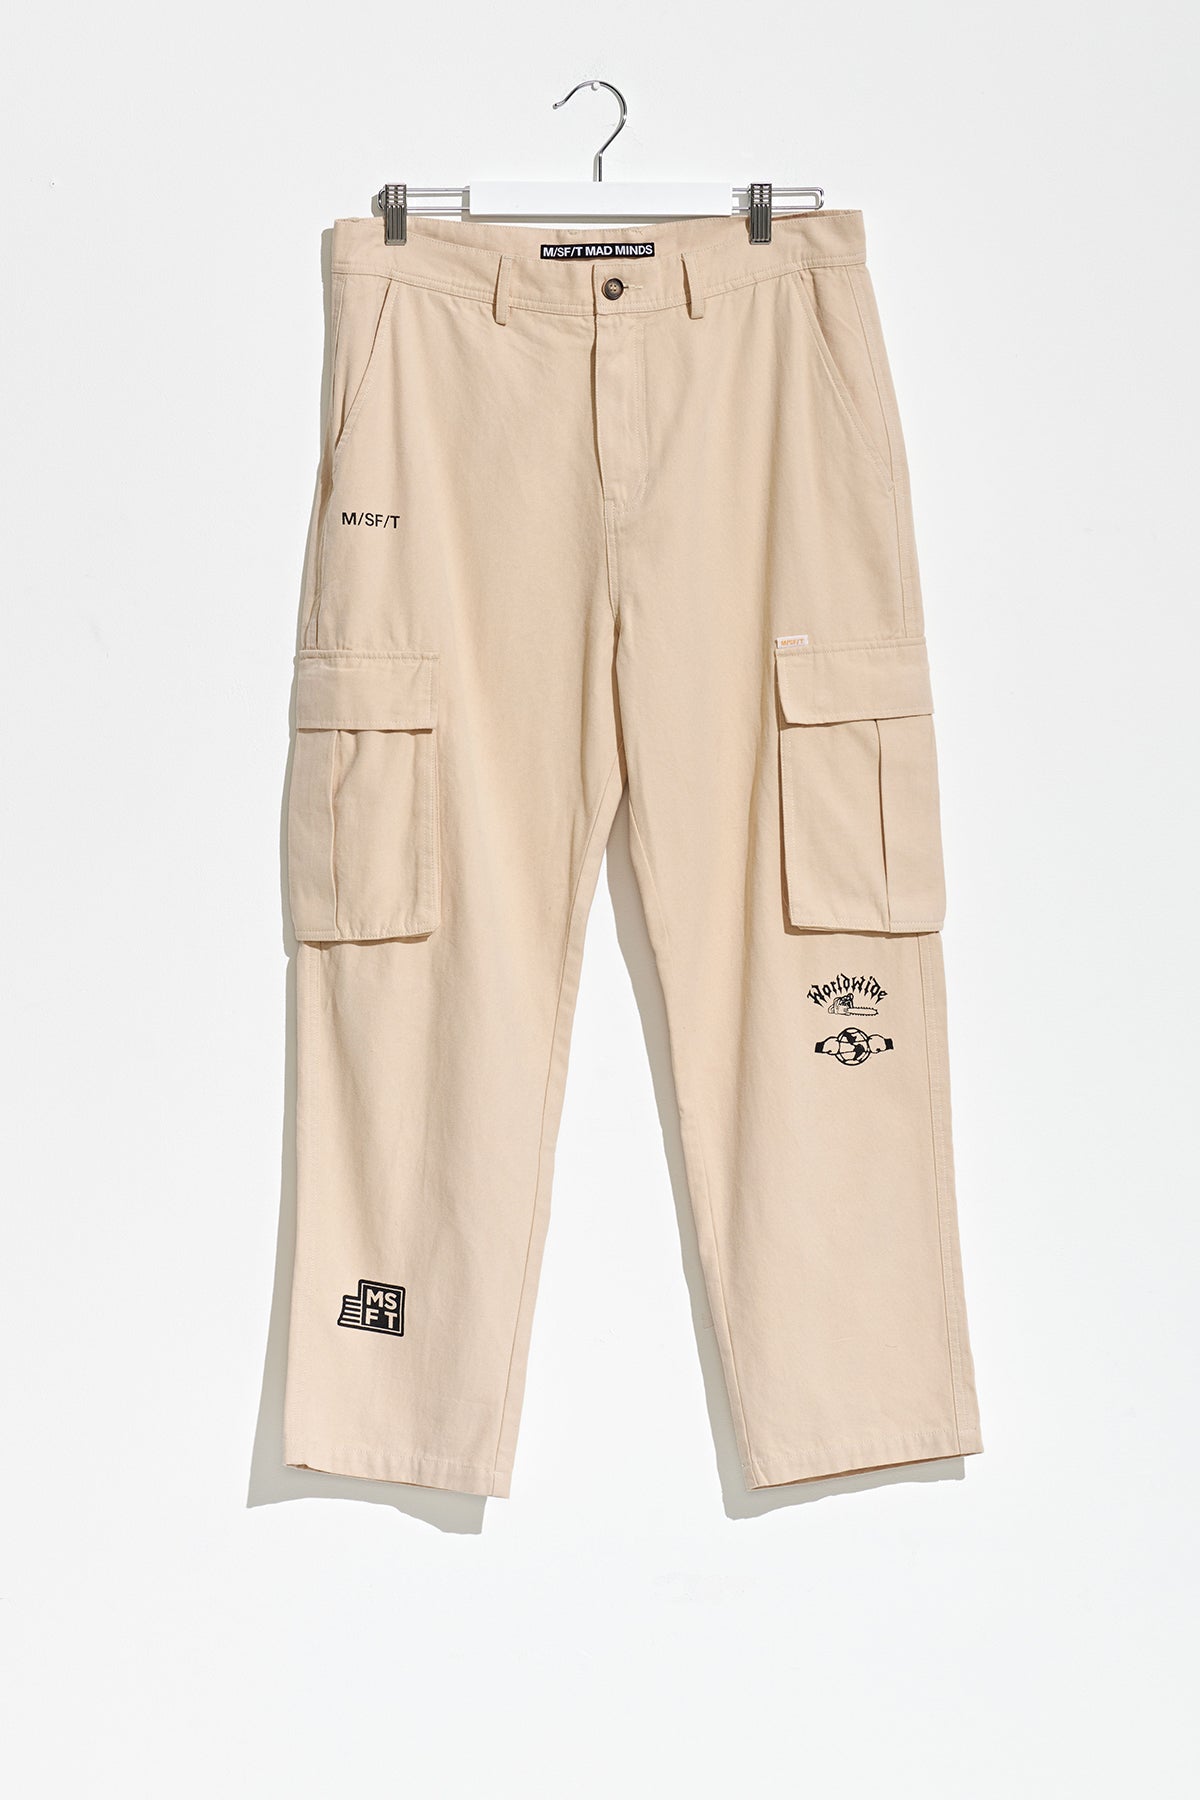 GREEN ONIONS CARGO PANT - Off White